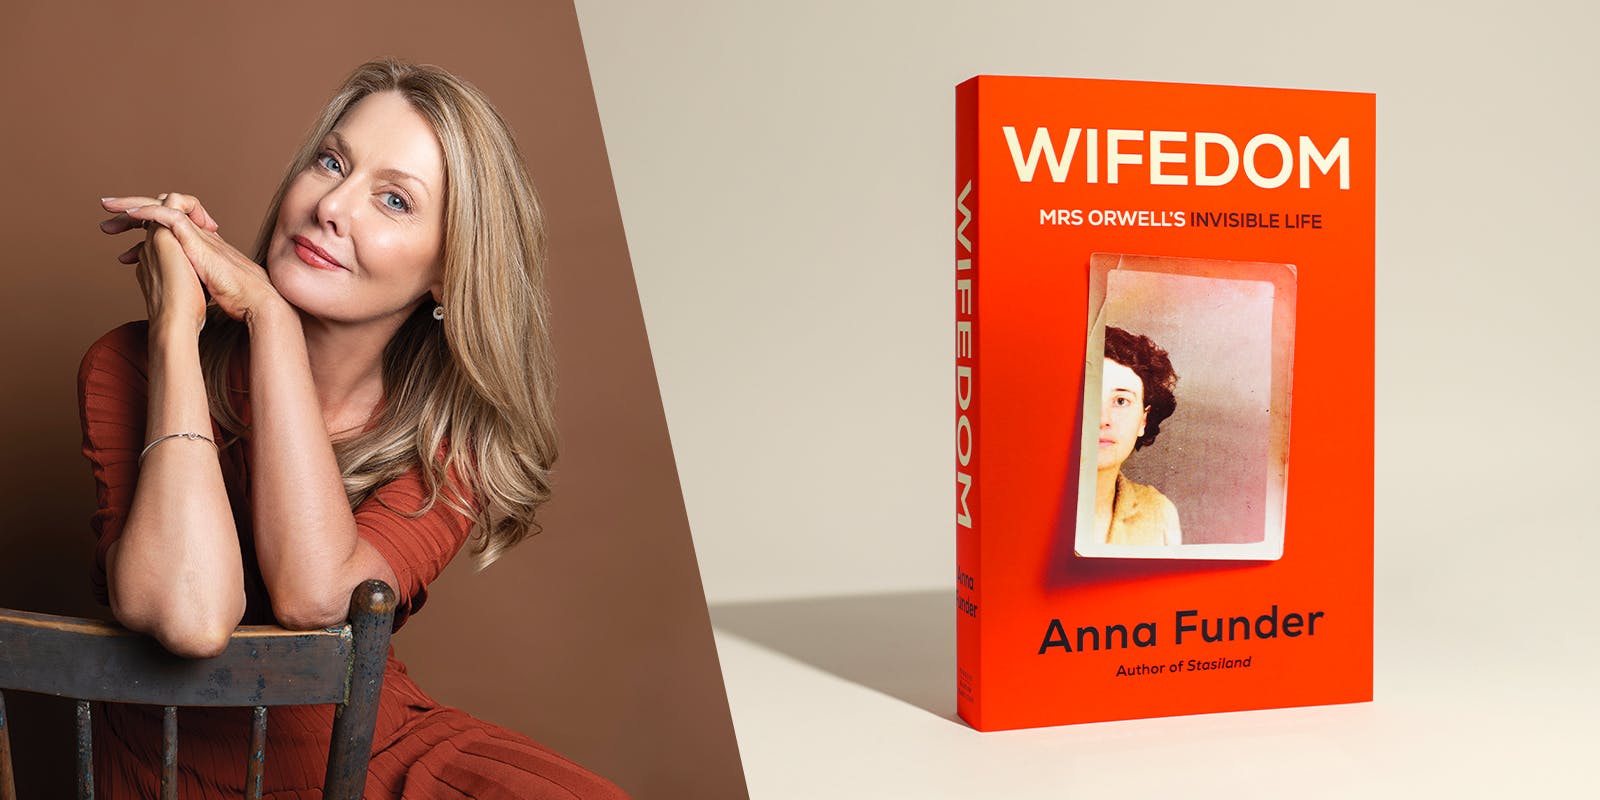 Anna Funder taking on the patriarchy 